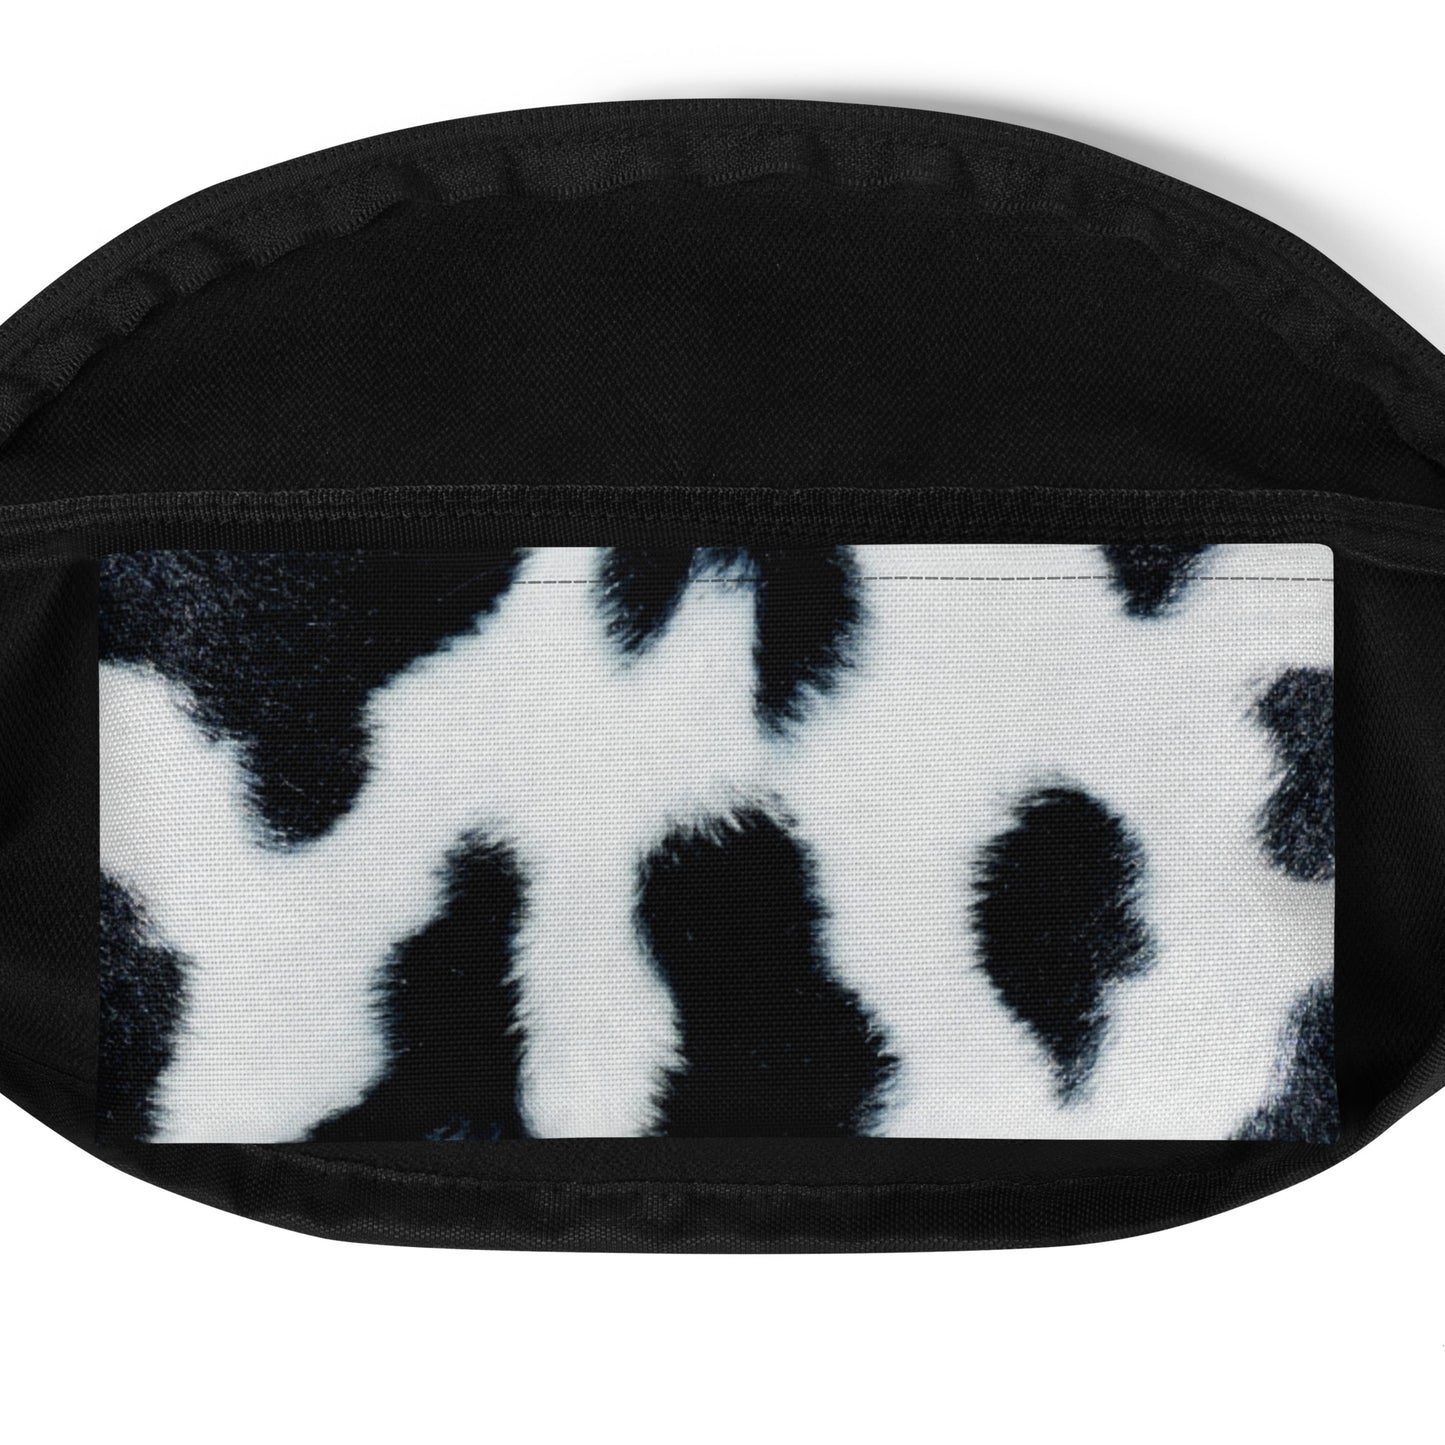 Black and White Cow Pattern Fanny Pack CedarHill Country Market